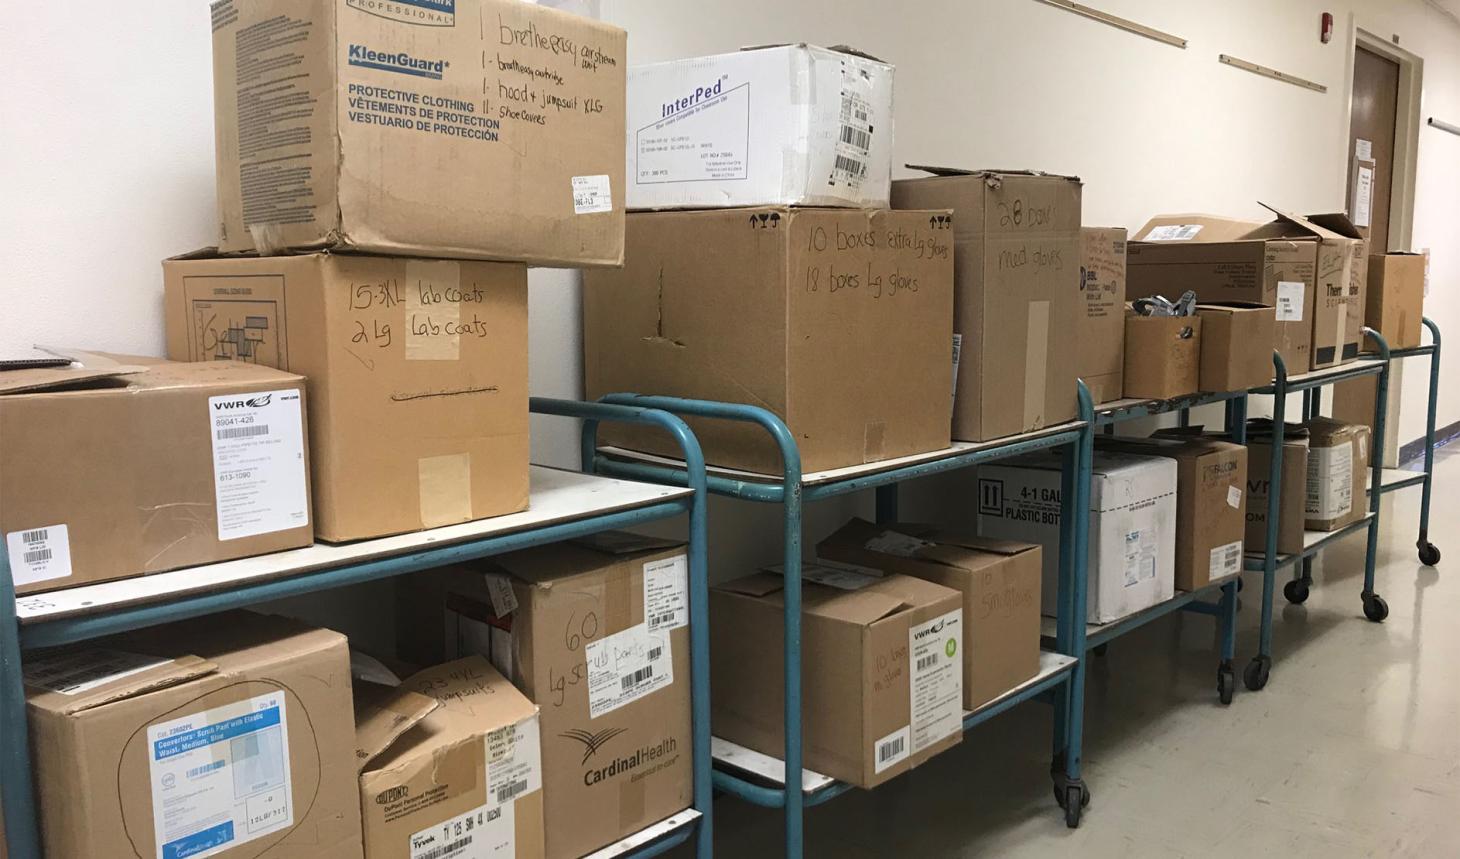 Boxes sitting on carts in hallway.